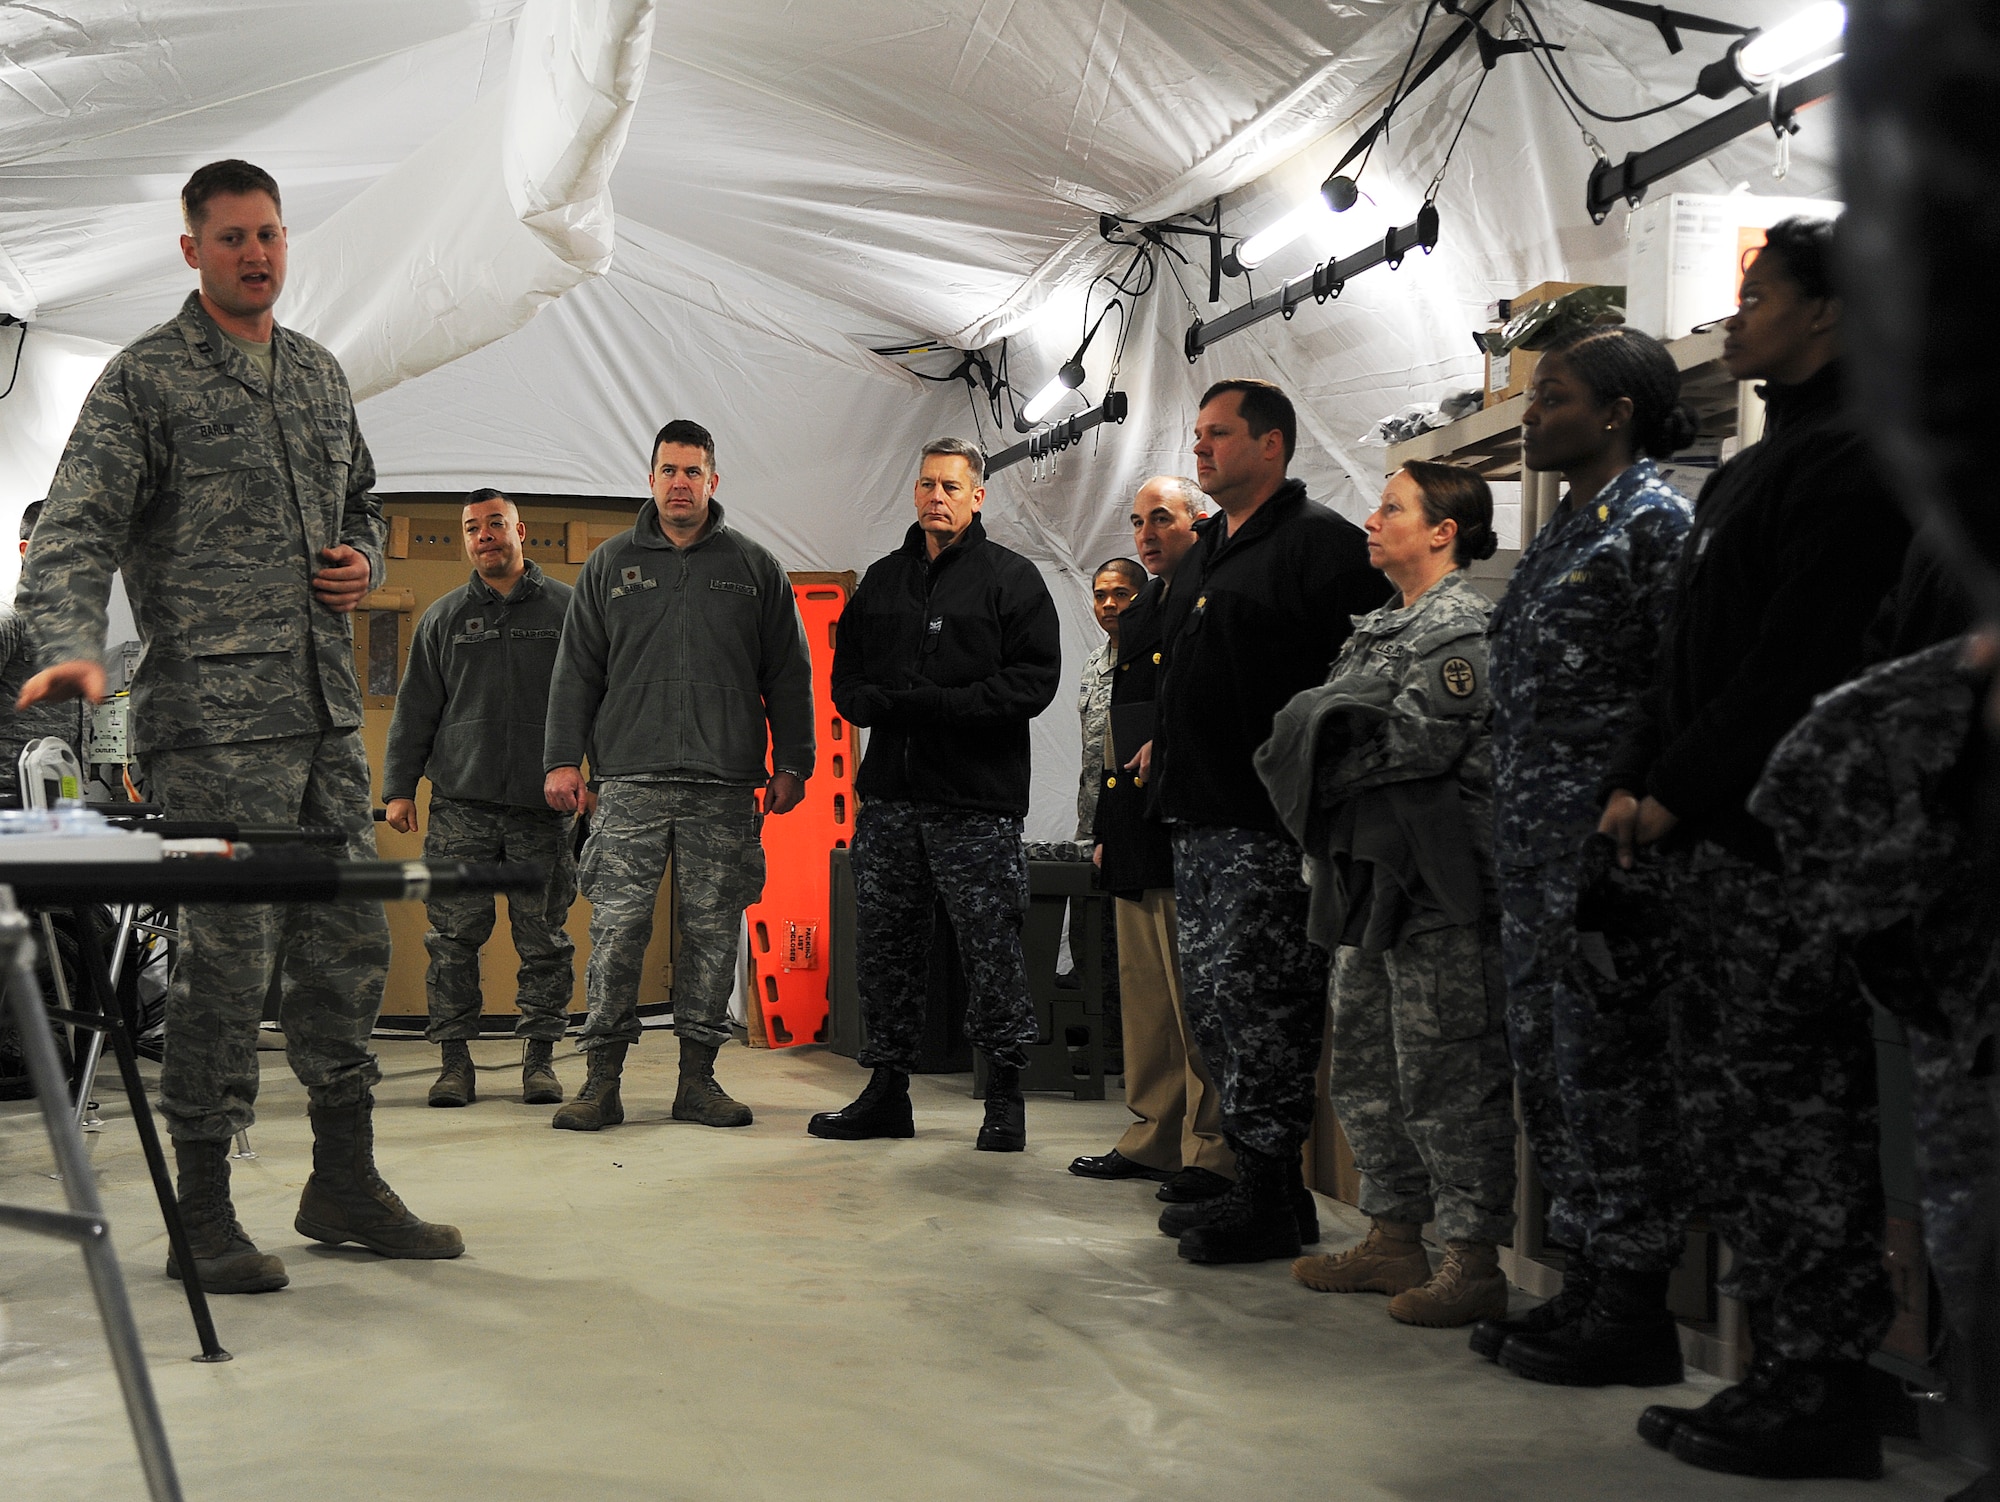 Capt. Benjamin Barlow gives a presentation to Joint Service members and partners from Ft. Eustis and the Naval Medical Center Portsmouth, Va.. The joint-service visited the Expeditionary Medical Support System exercise location 17 February, 2014. The visit was to see if they can incorporate the modernization of the new tent systems and equipment into their expeditionary operations. (U.S. Air Force photo by Staff Sgt. Steve Stanley/Released)